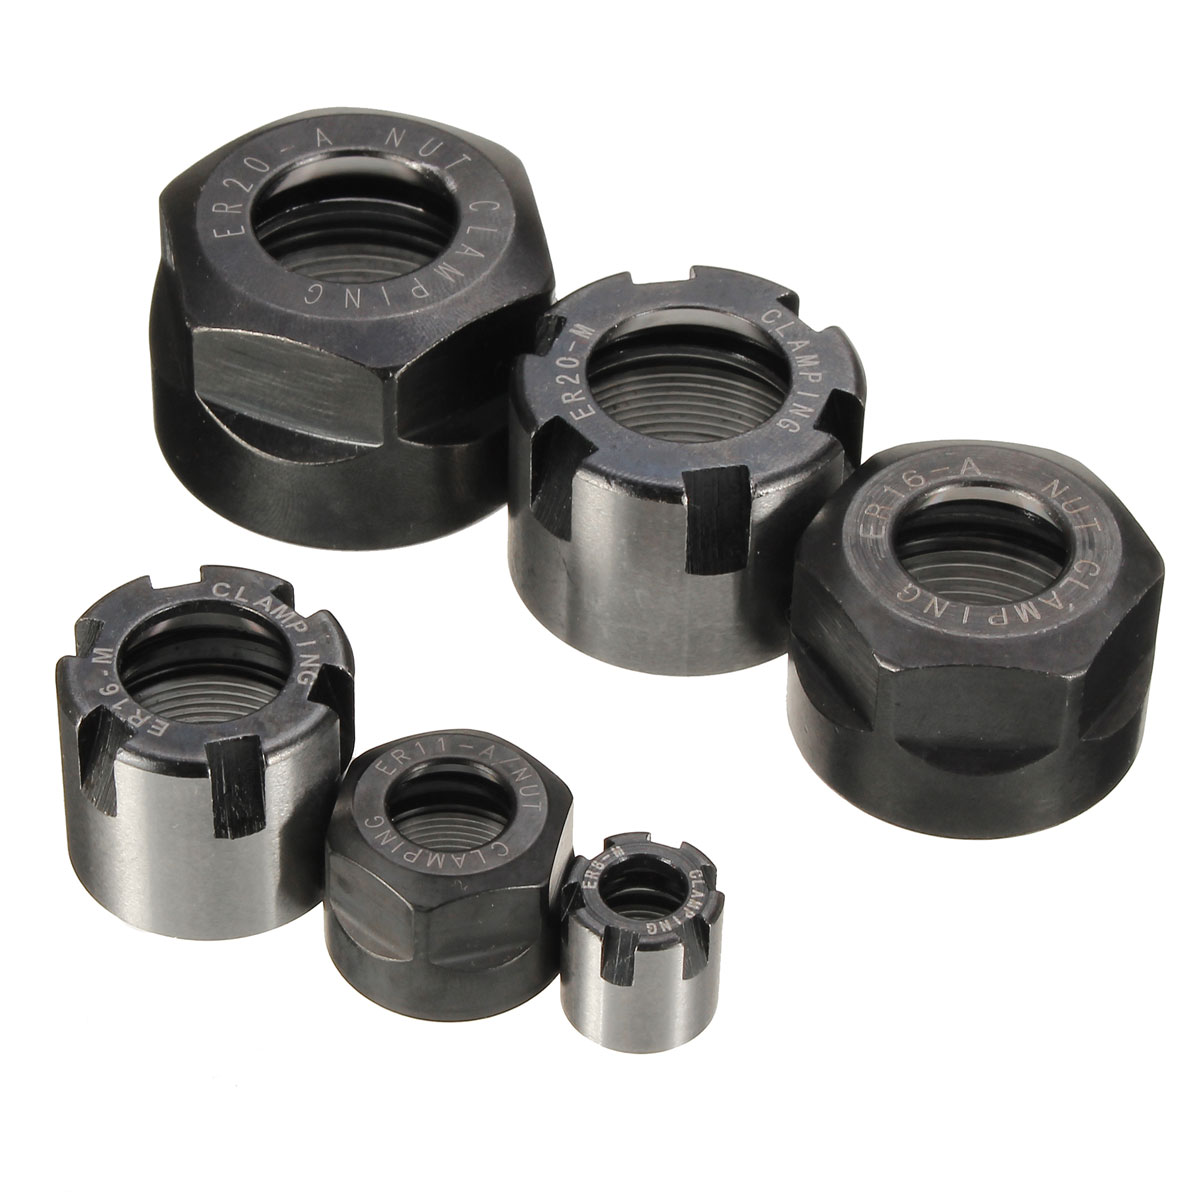 ER--A-M-Type-Nut-Collet-Clamping-Nut-for-CNC-Milling-Chuck-Holder-Lathe-Tool-1064956-2